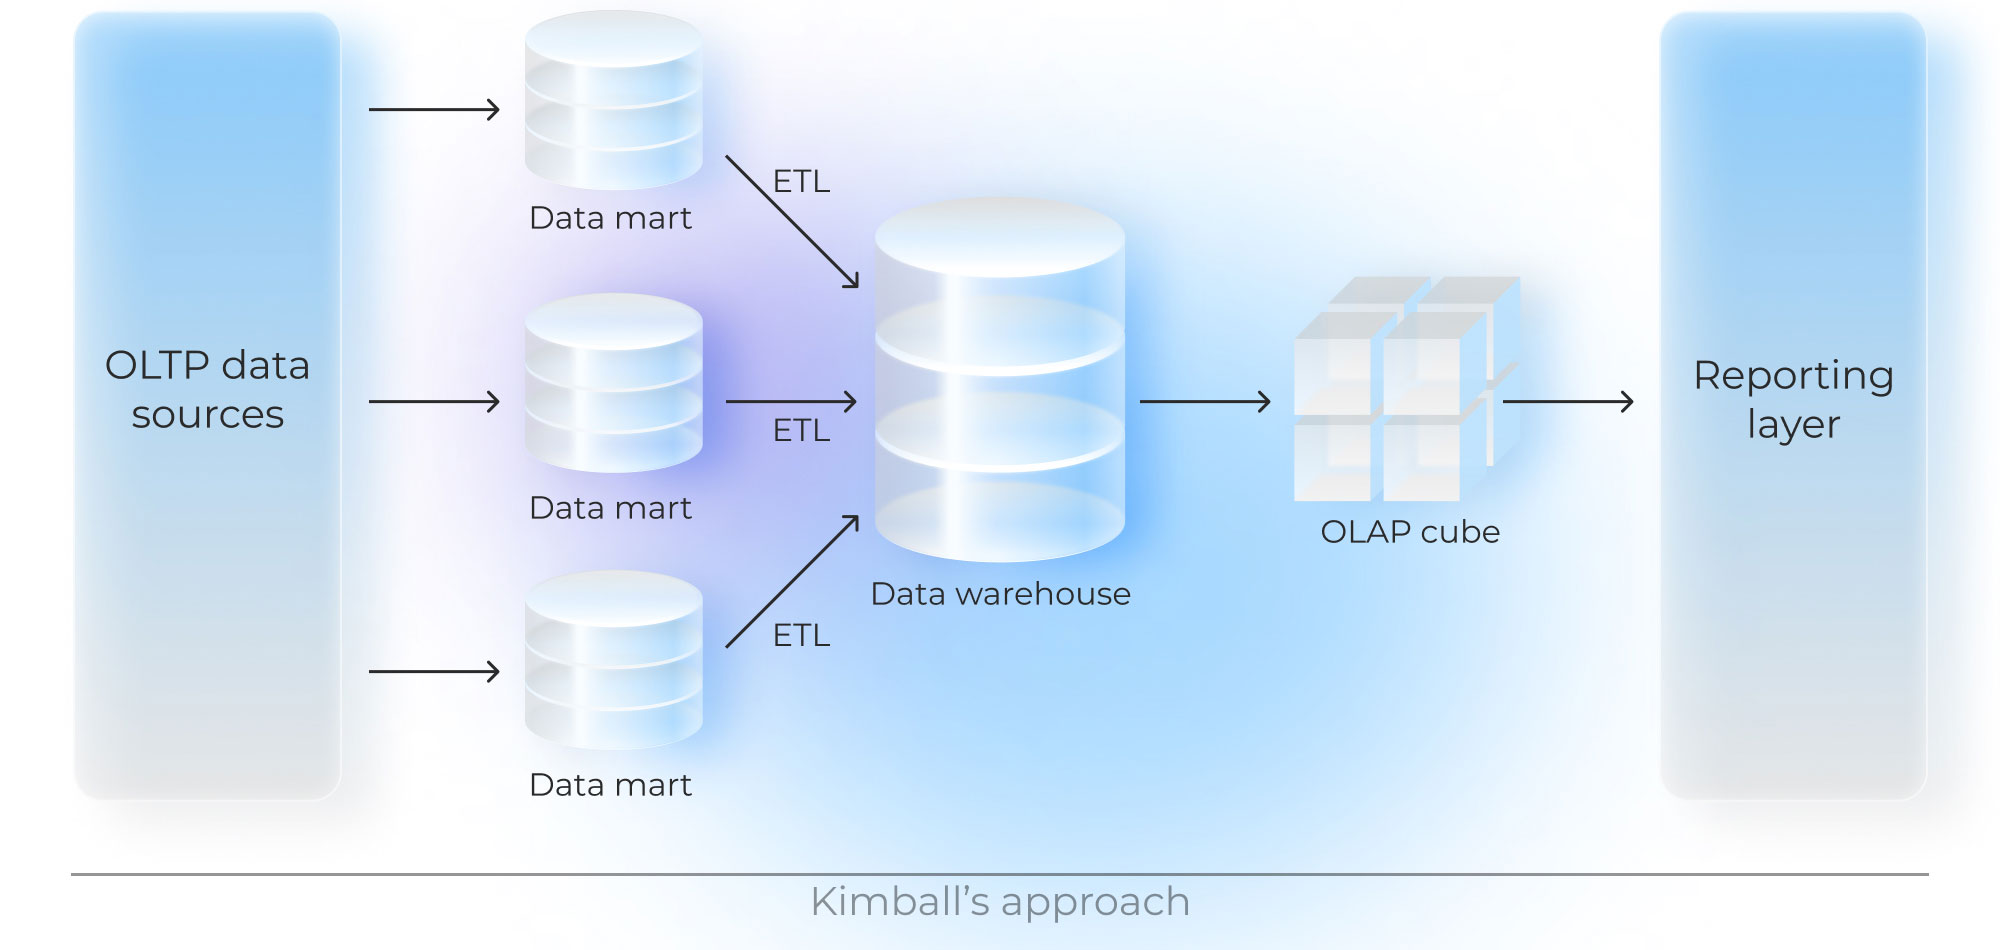 The first approach to building a data warehouse